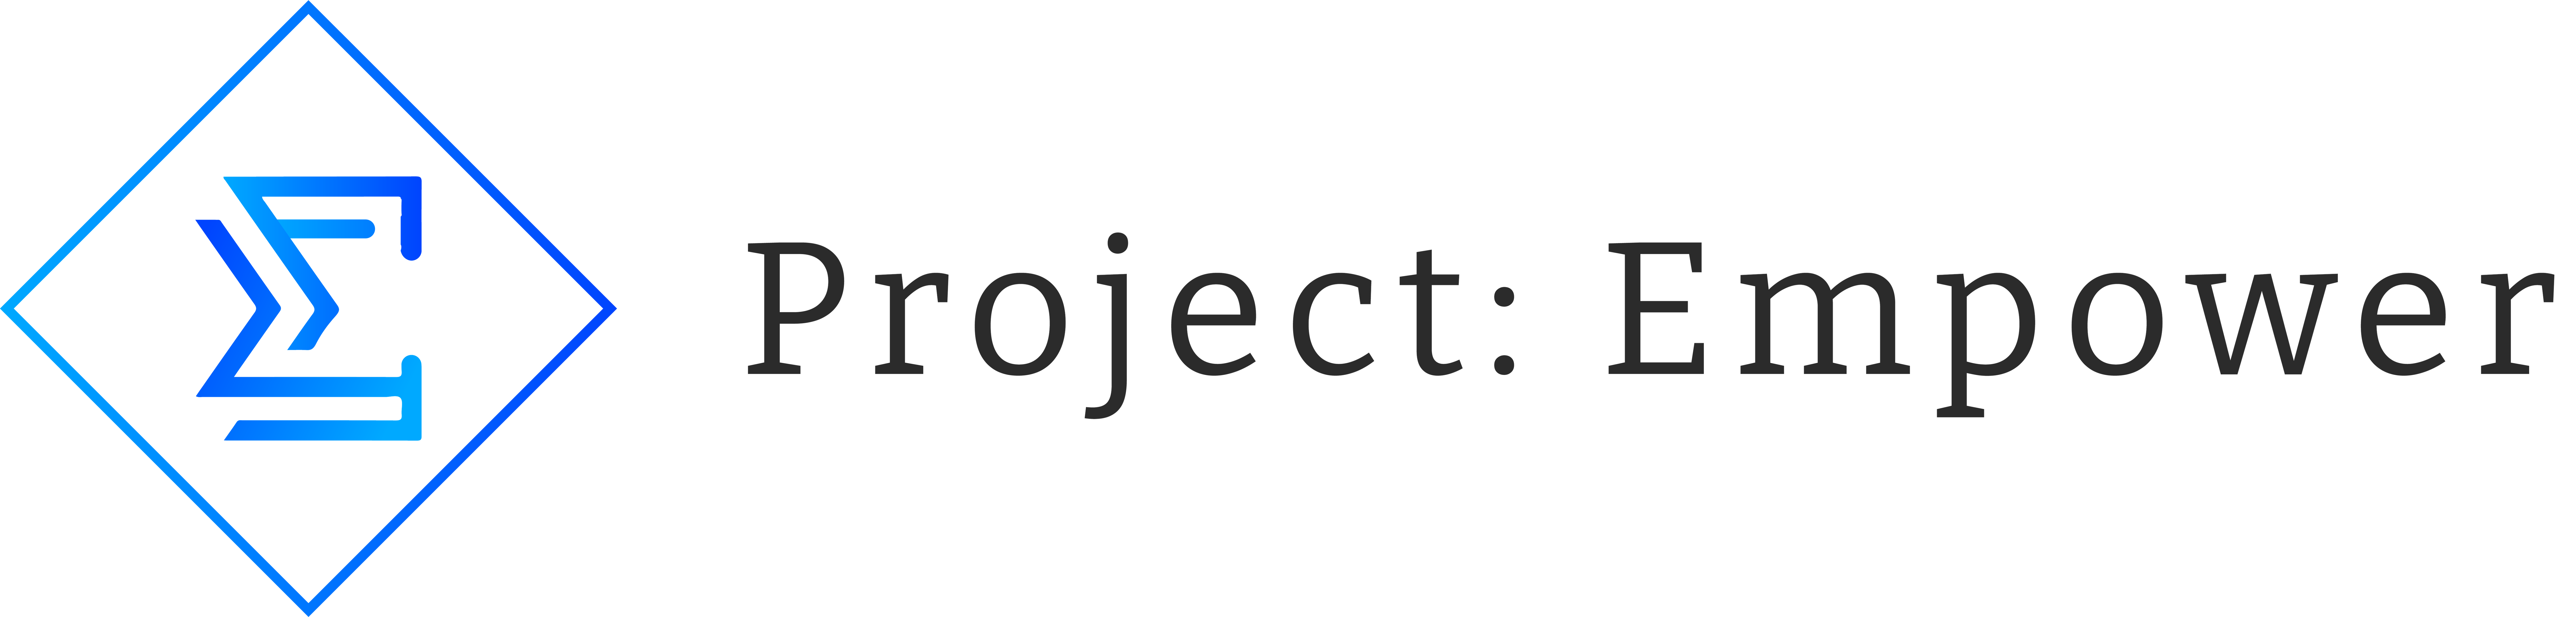 Project: Empower logo